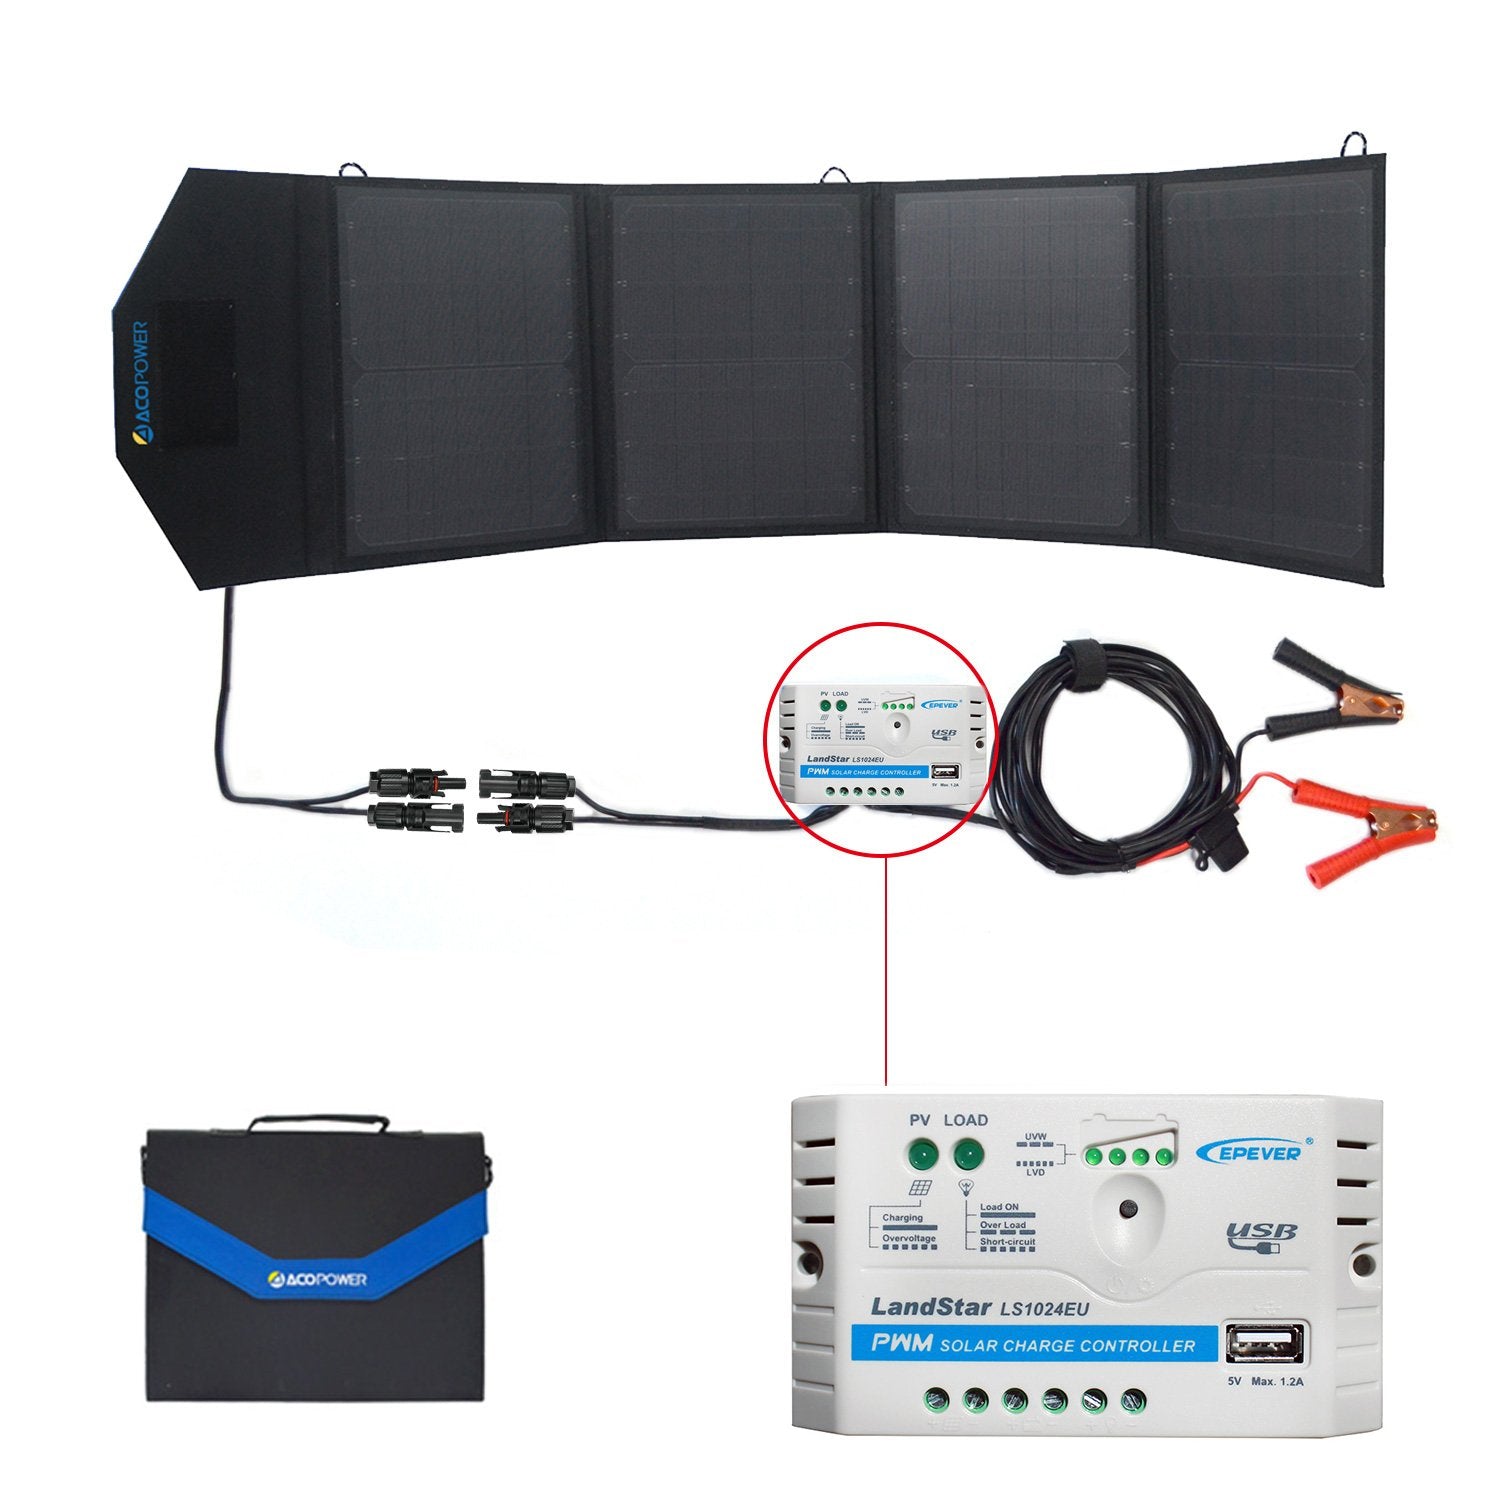 50 WATT, 12 Volt Foldable/Portable Solar Panel Suitcase Kit with 5 Amp PWM Solar Charge Controller